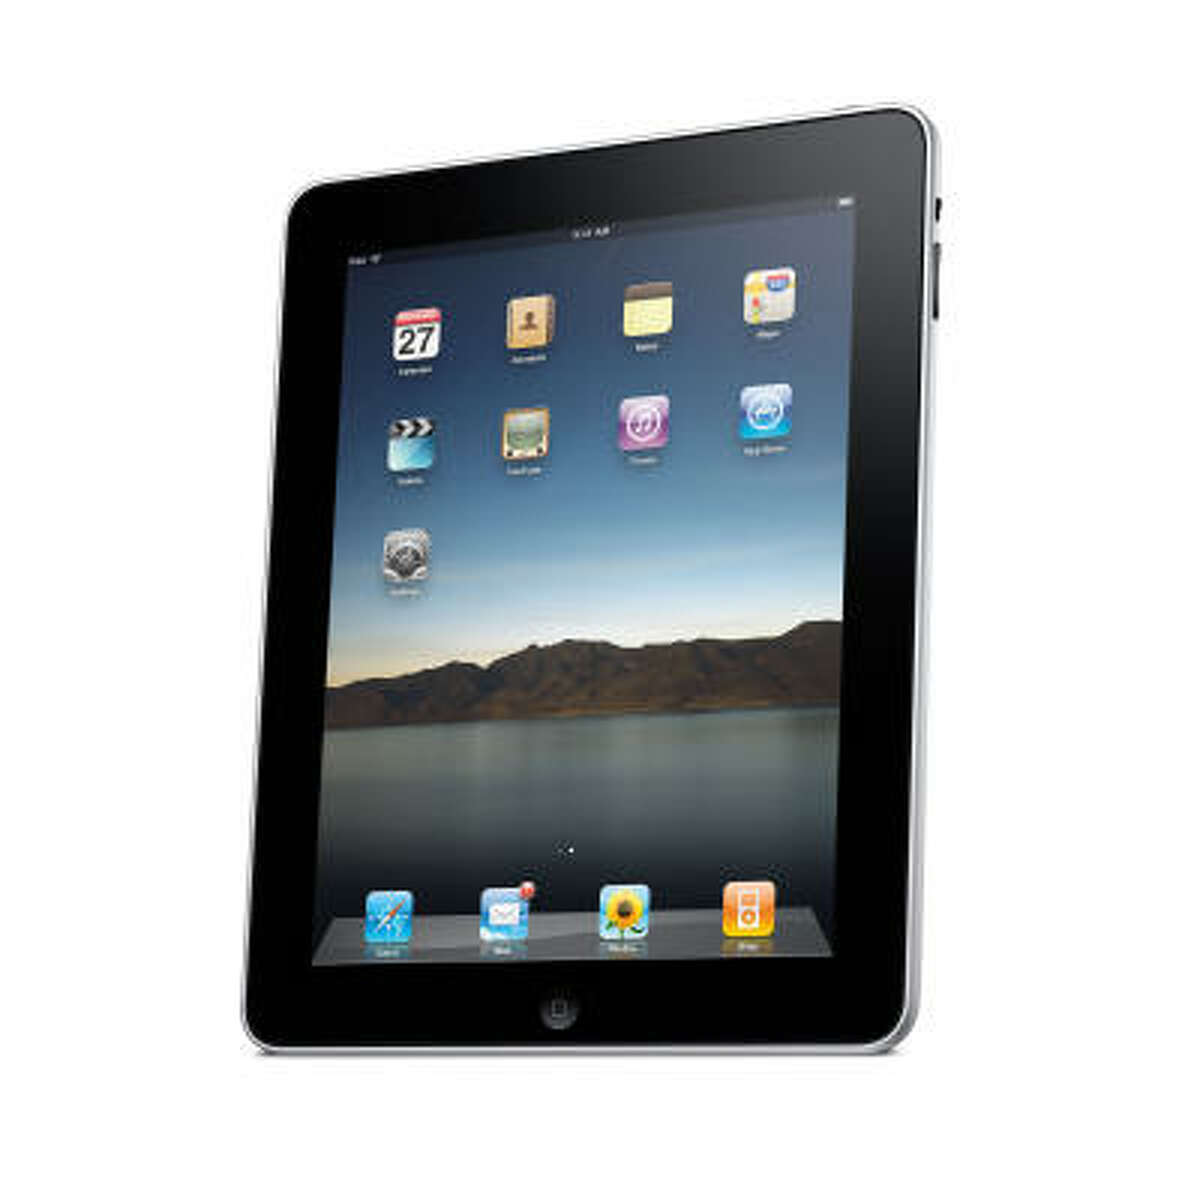 Apple iPad, $499-$829. Apple’s tablet computer is undoubtedly the Gadget of the Year.